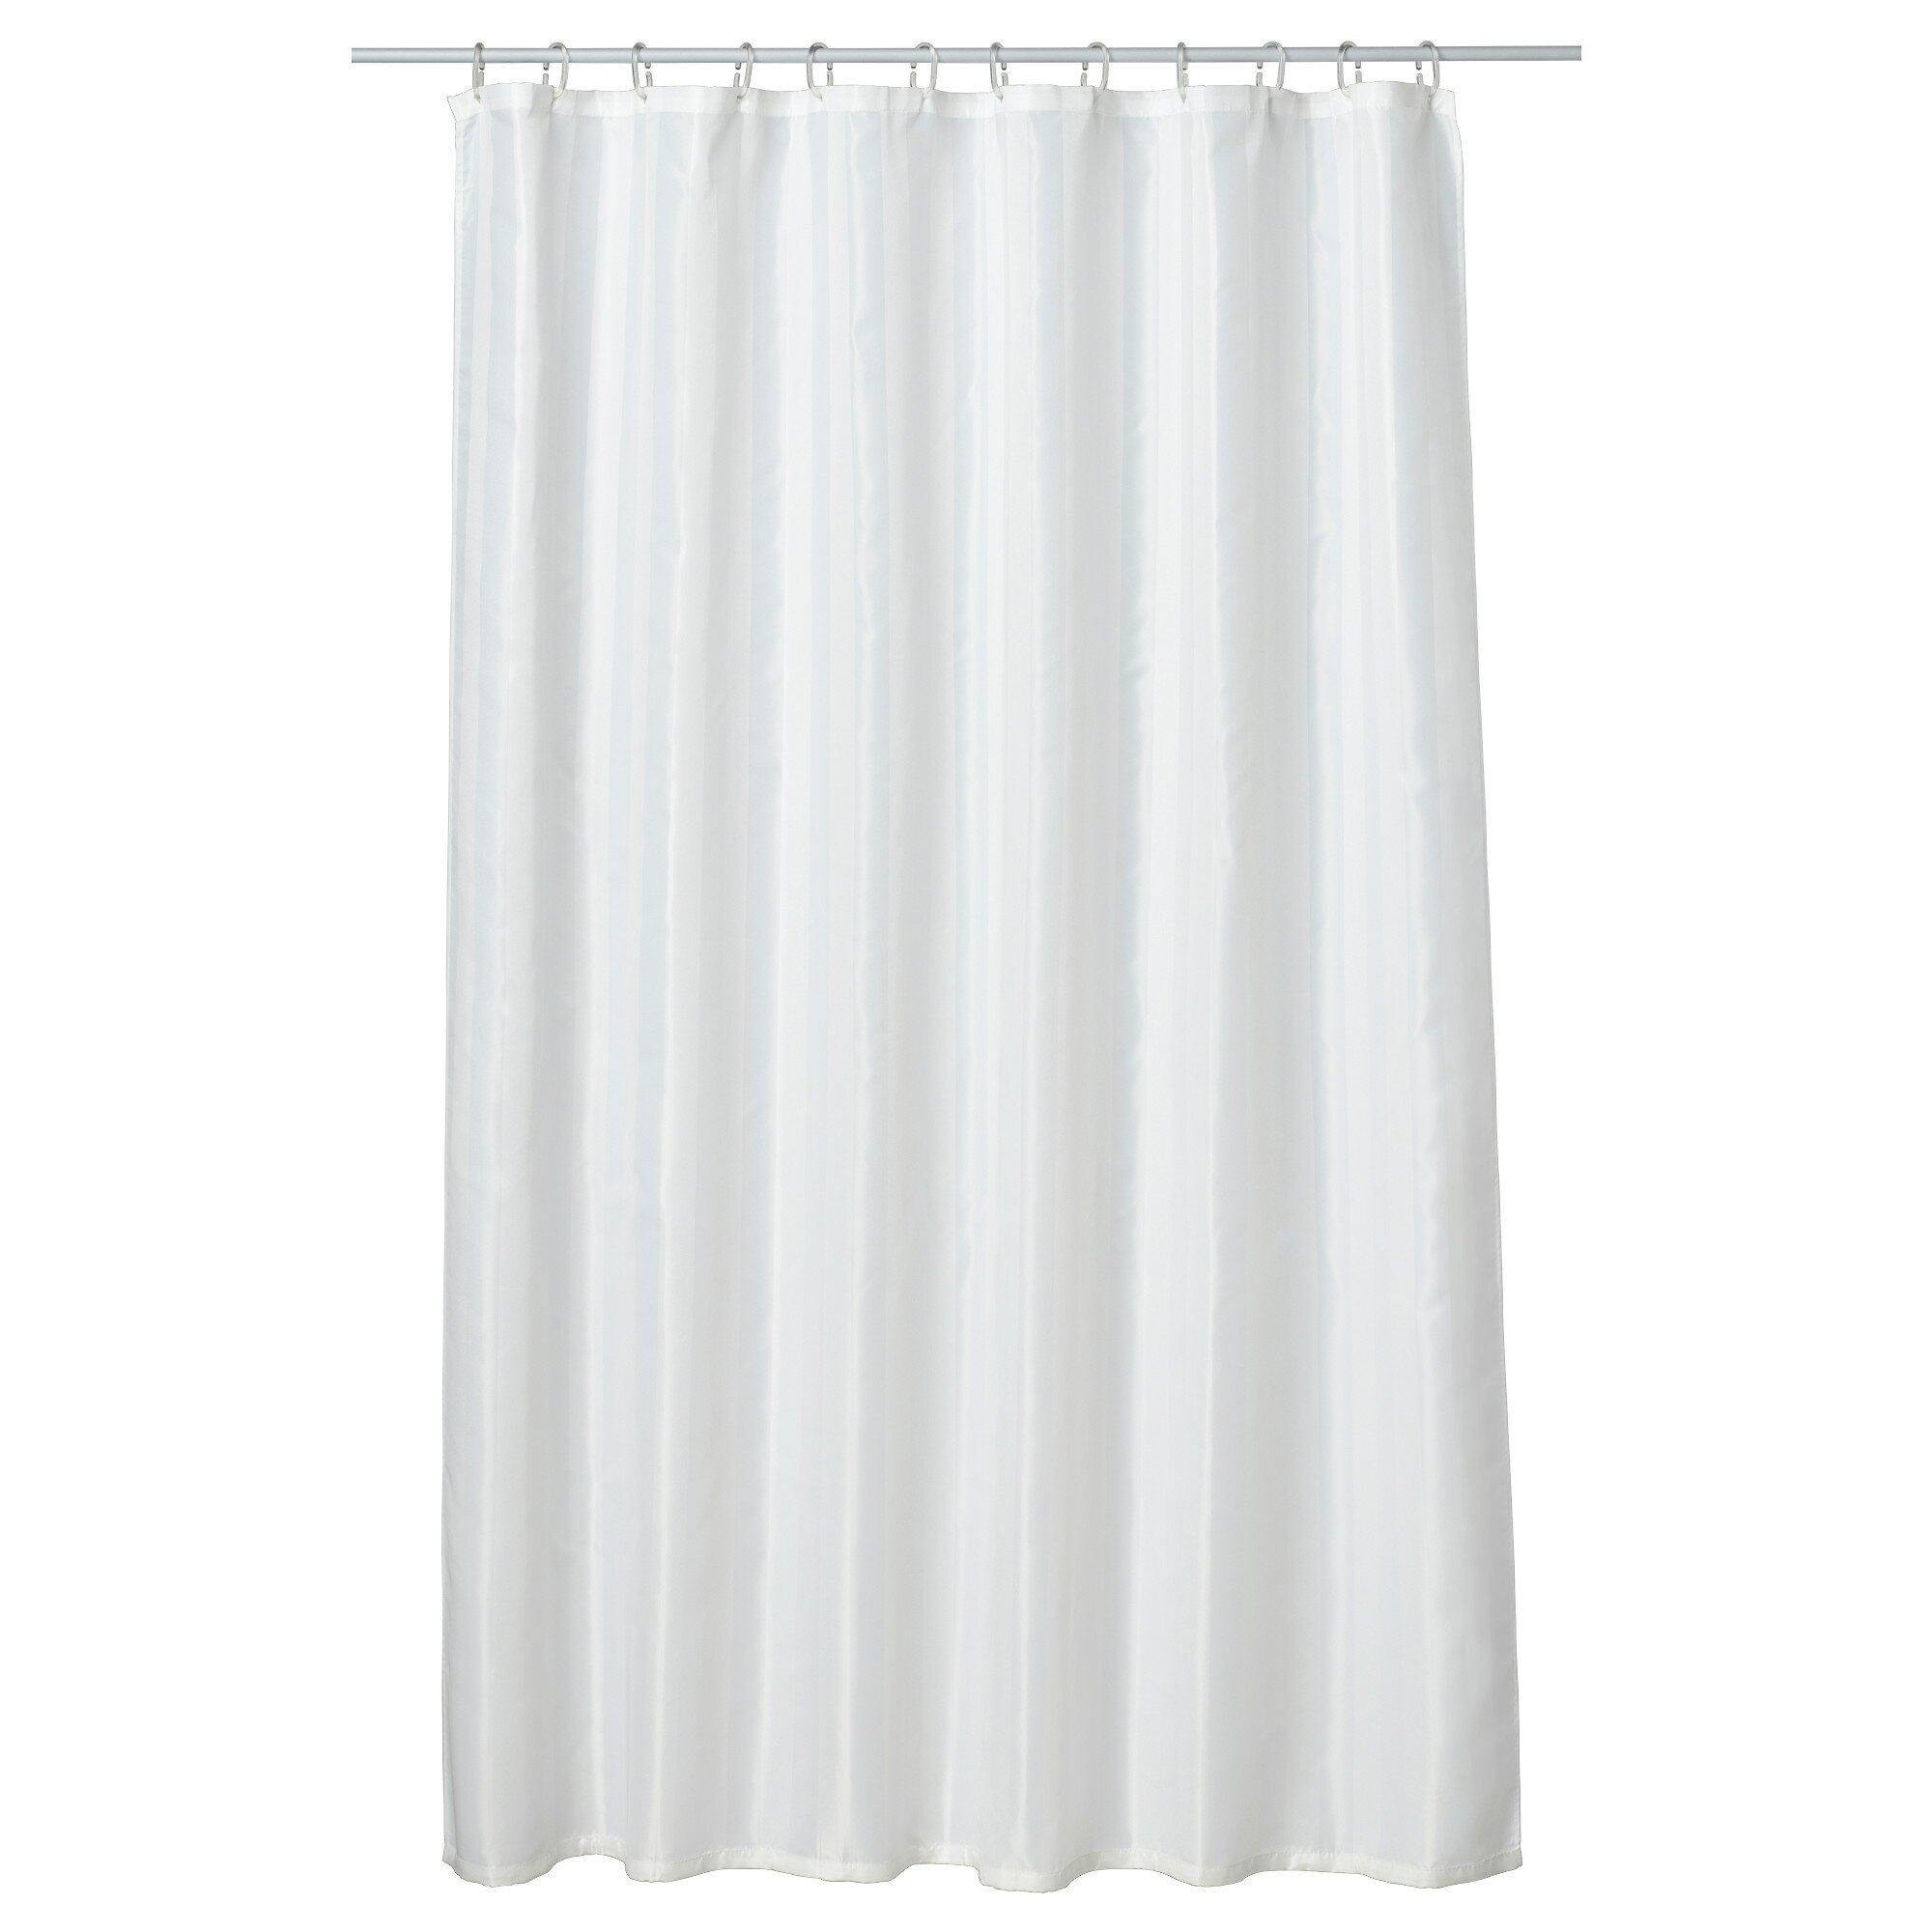 Ikea Shower Curtain for Best Your Bathroom Decoration: Ikea Shower Curtain | Shower Curtain Rail Ikea | Ikea Shower Curtain Rail